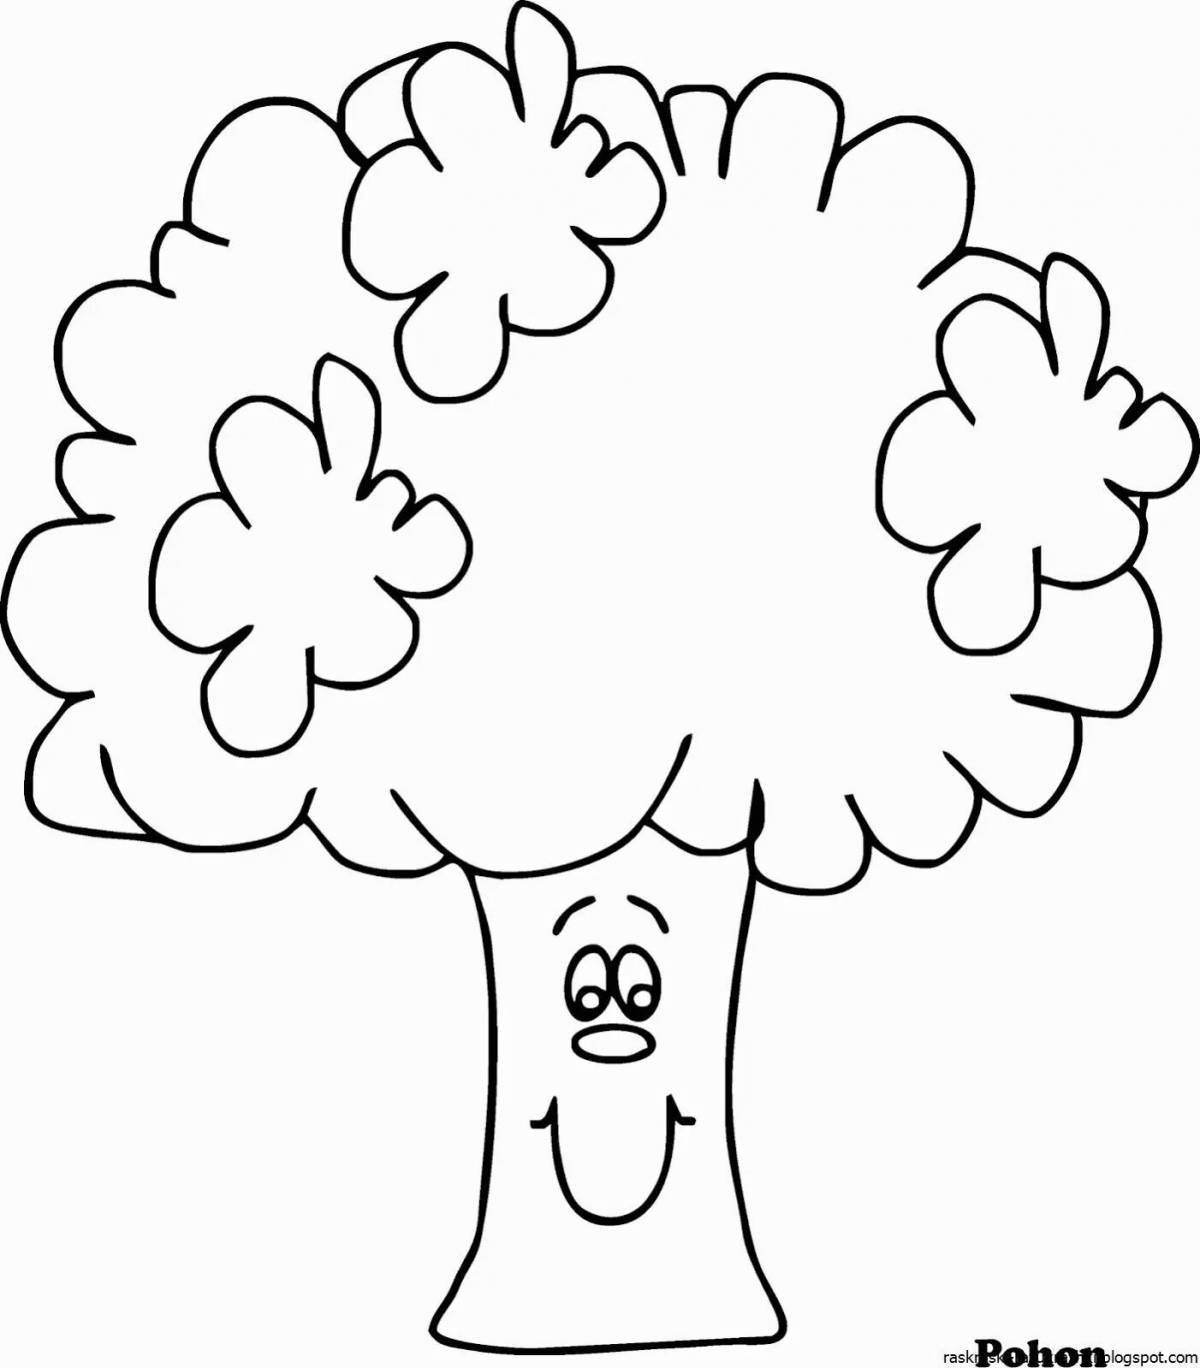 Glowing tree coloring book for 2-3 year olds